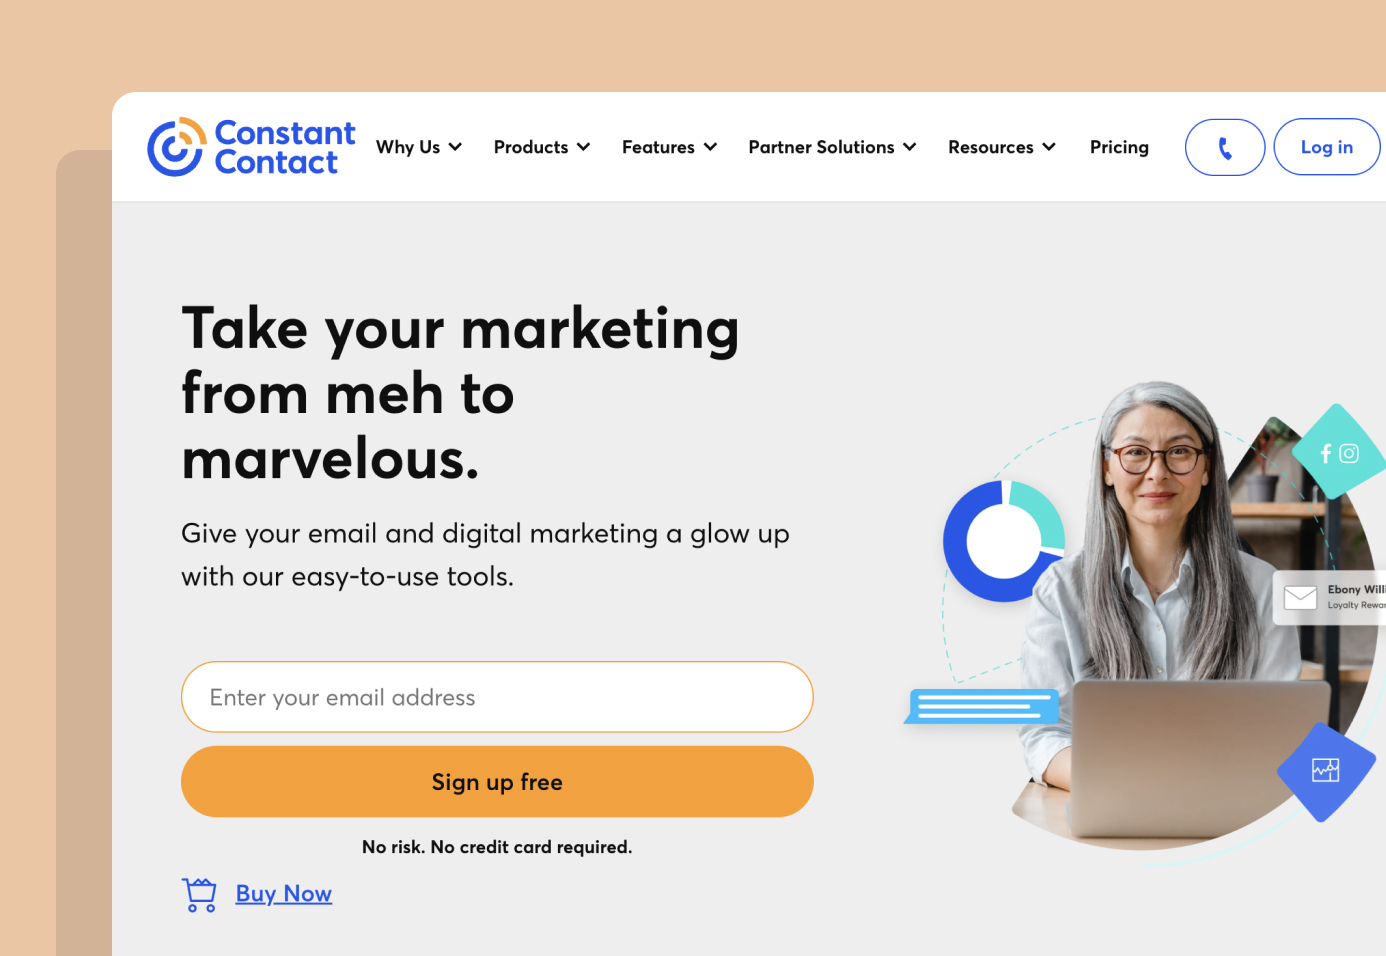 Constant Contact homepage